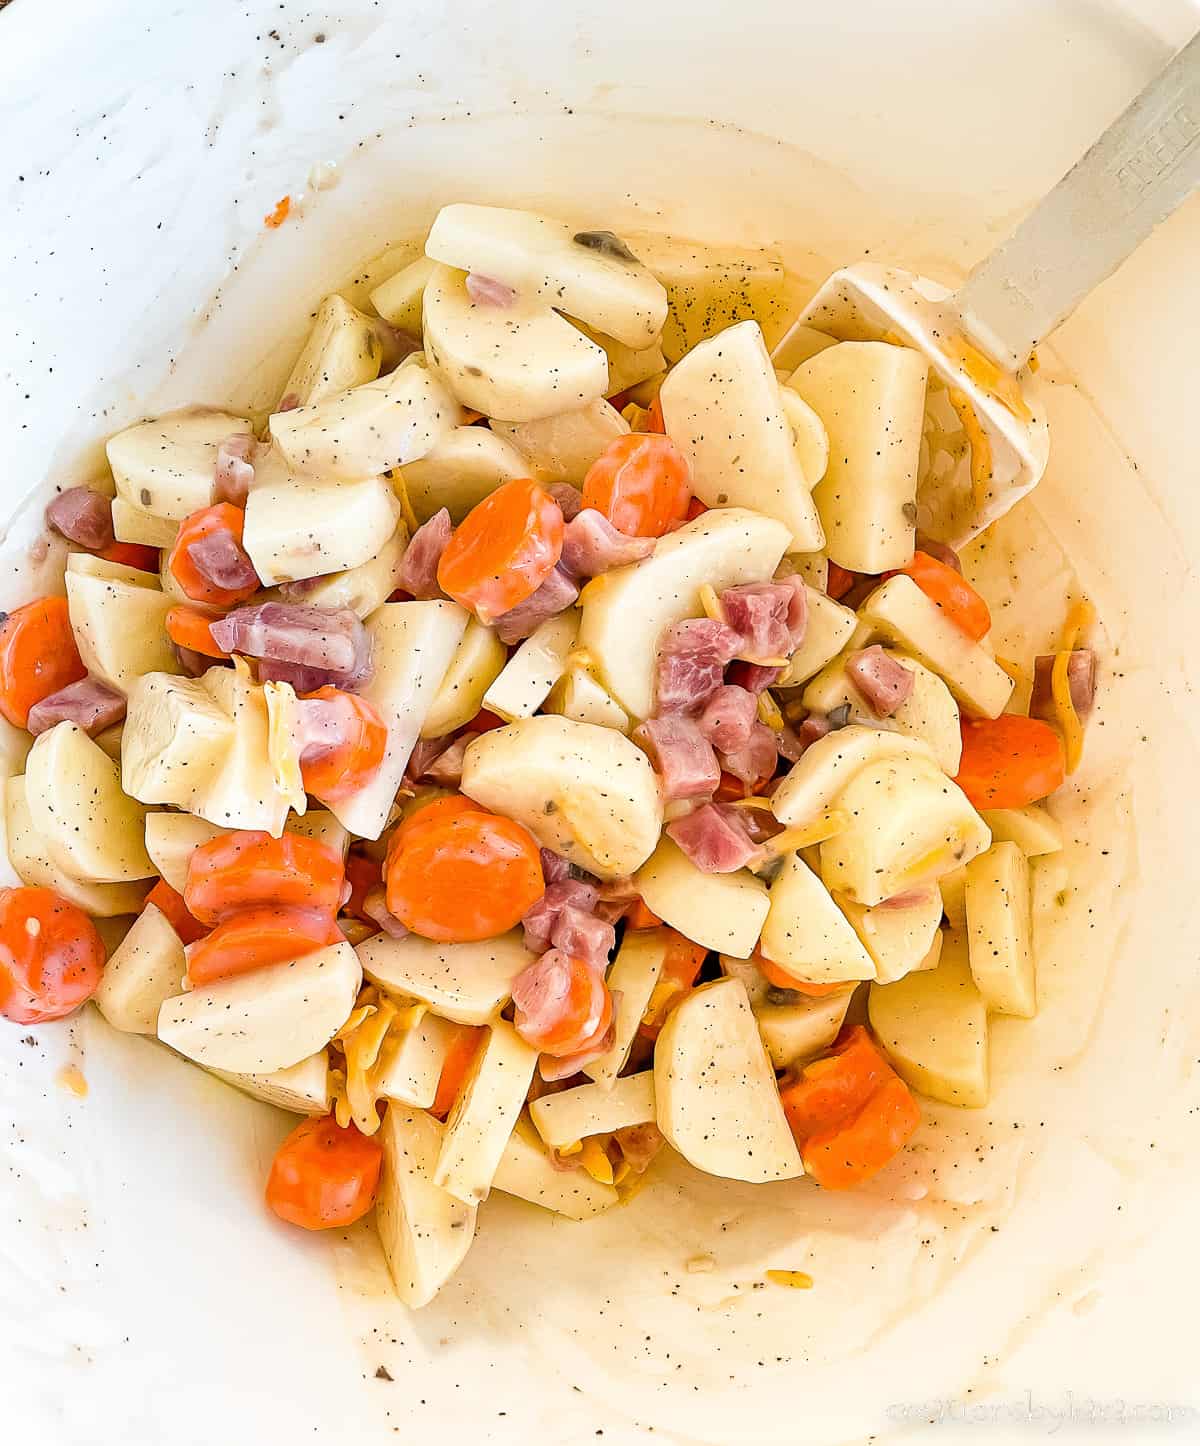 bowl of sliced carrots, potatoes, and diced ham ready to be baked